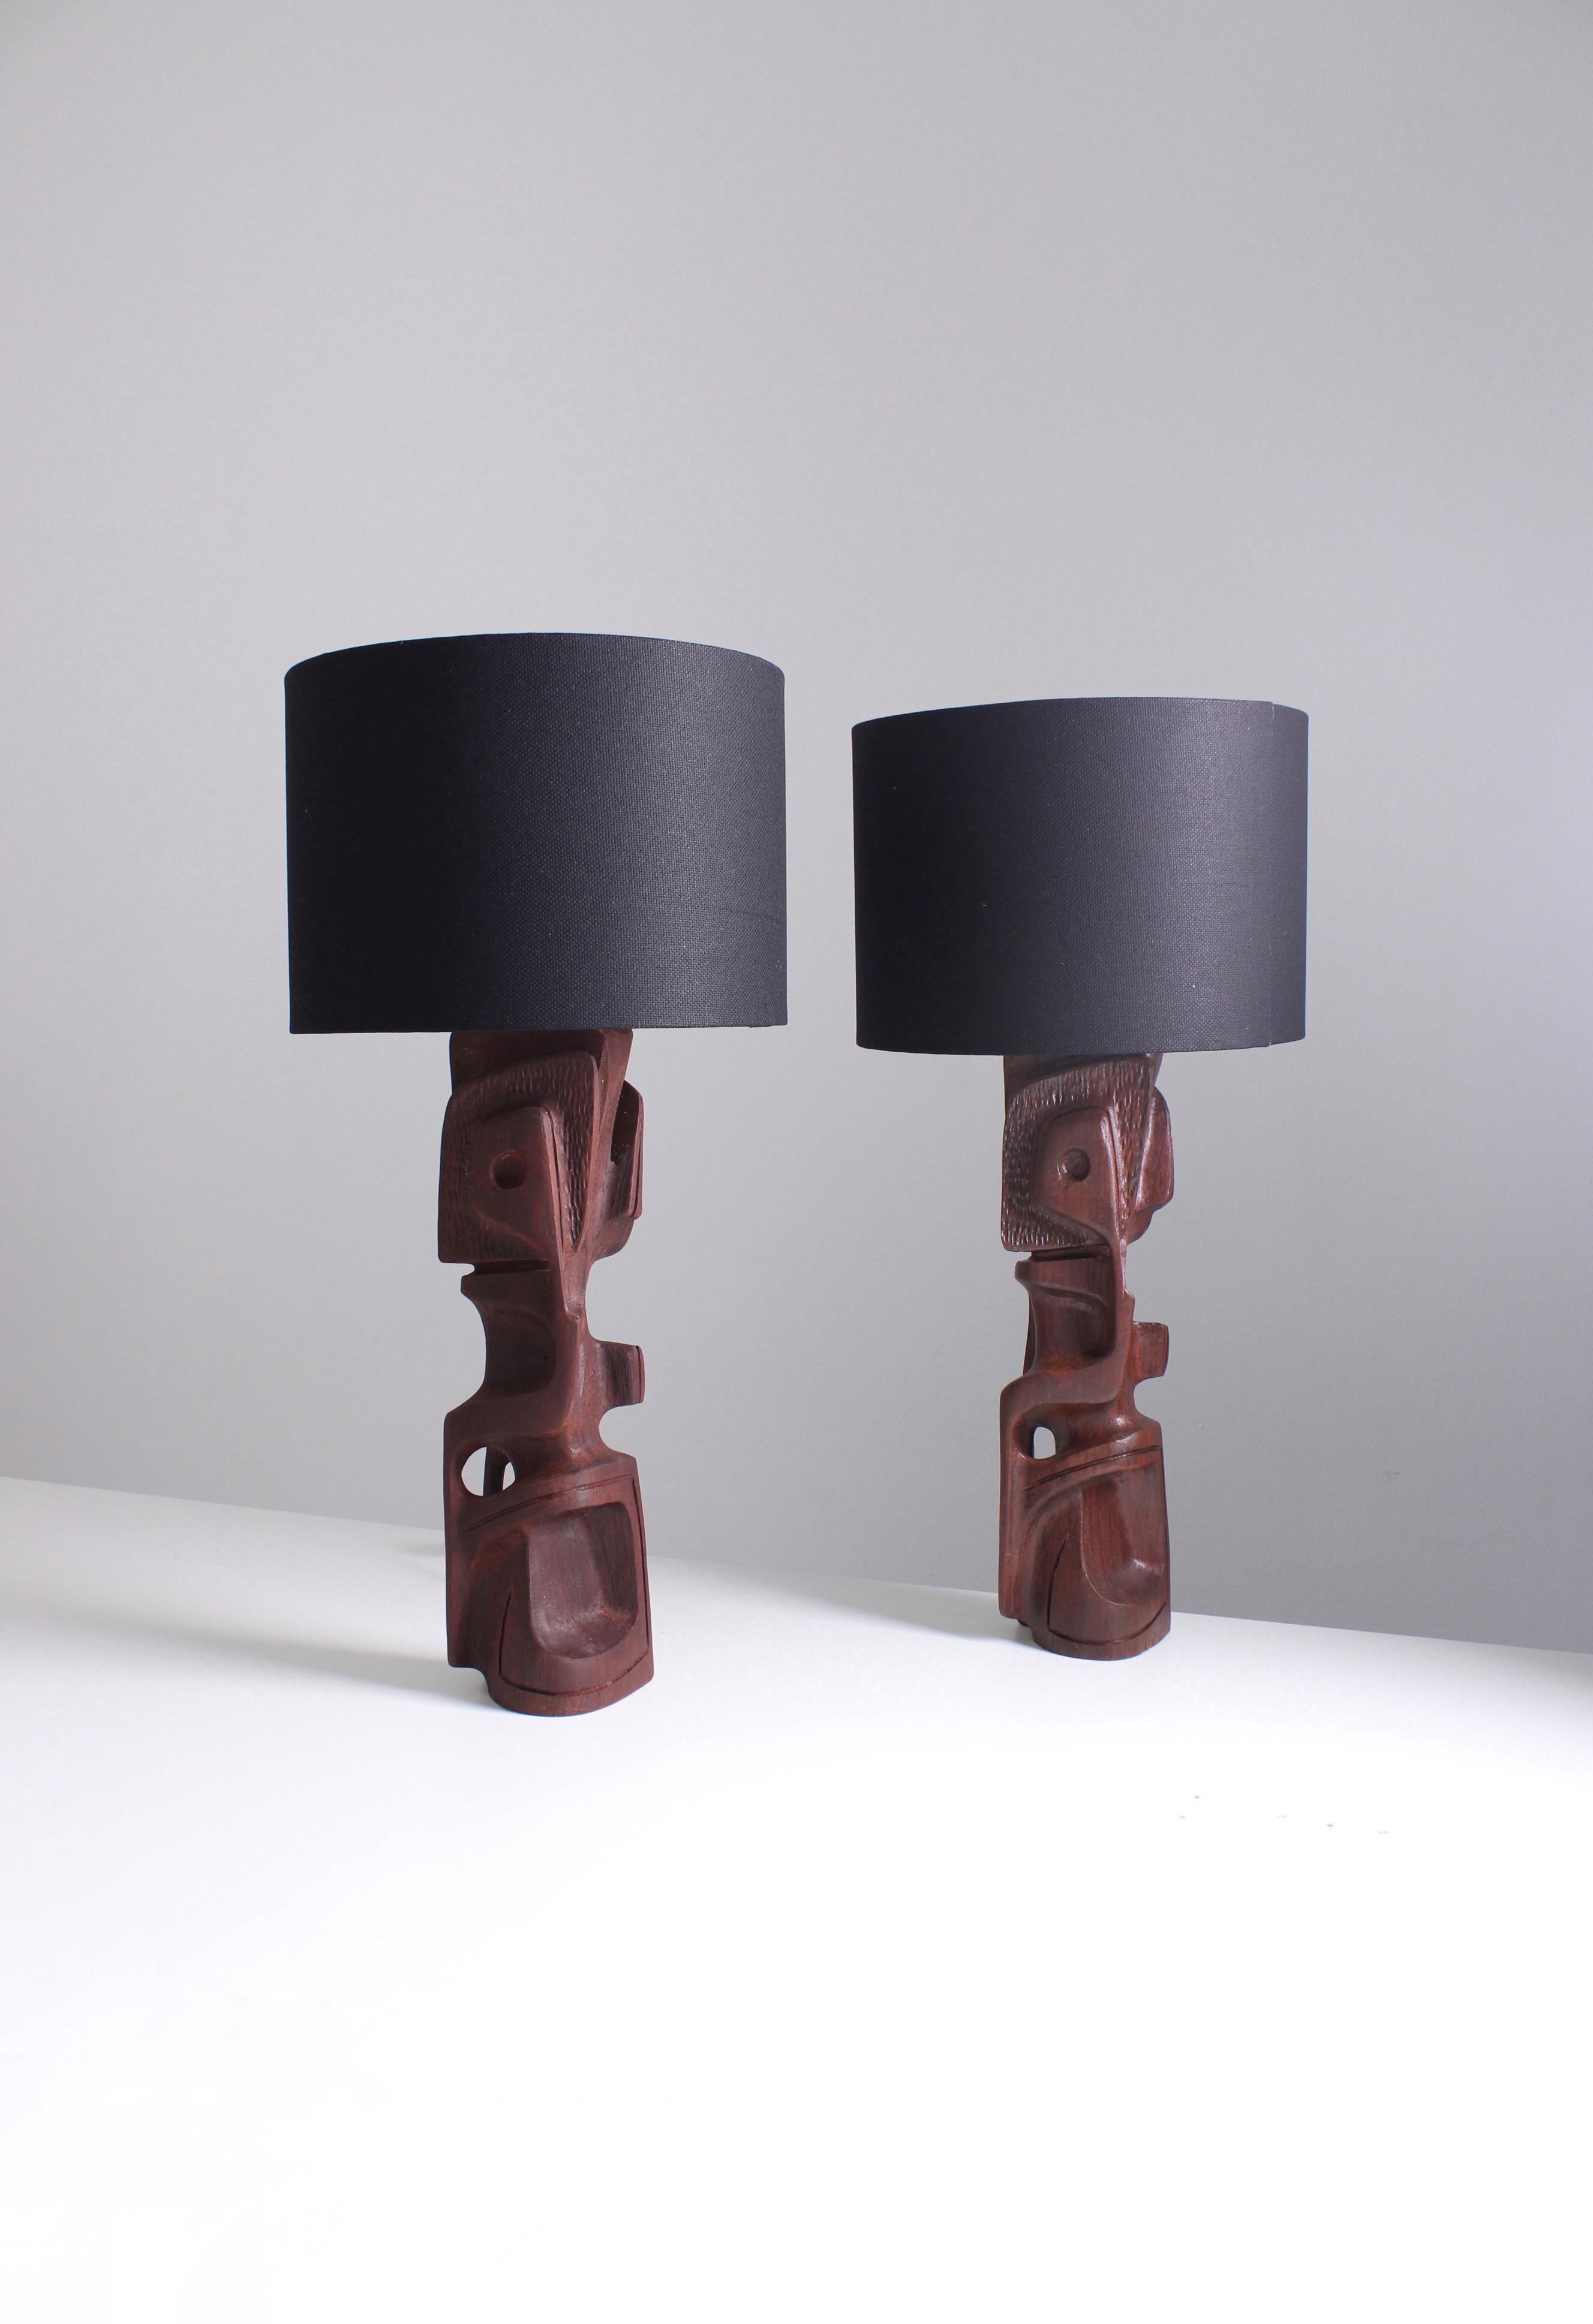 Italian Pair of sculptural table lamps in Padouk wood by Gianni Pinna, 1970s For Sale